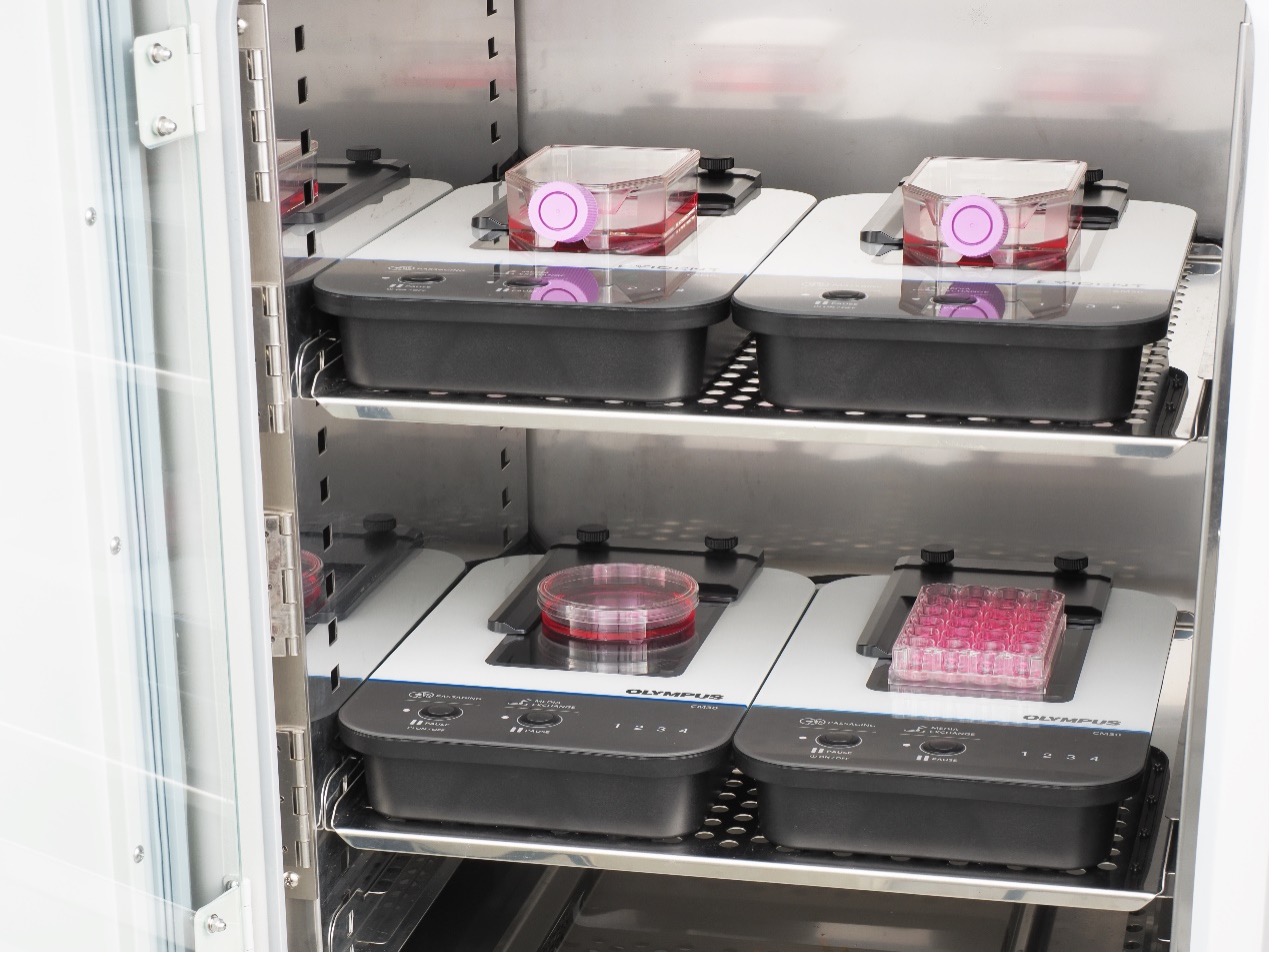 Incubation monitoring system for the culture of organoids